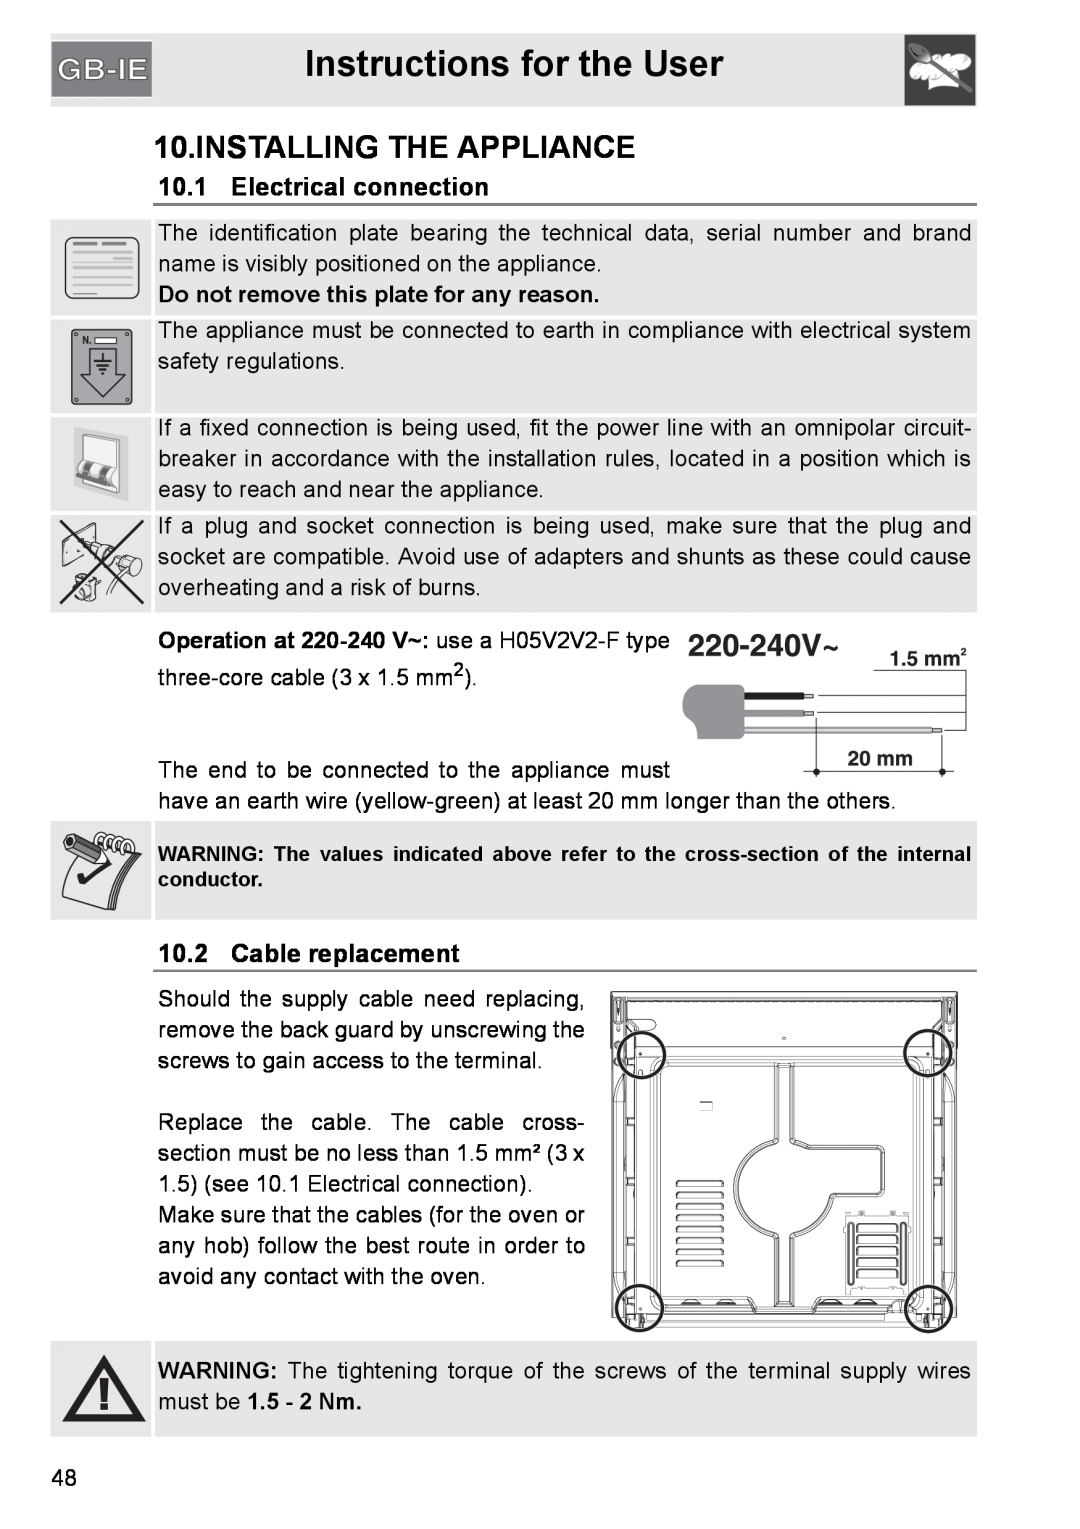 GE SA304X-8 manual Installing The Appliance, Electrical connection, Cable replacement, Instructions for the User 